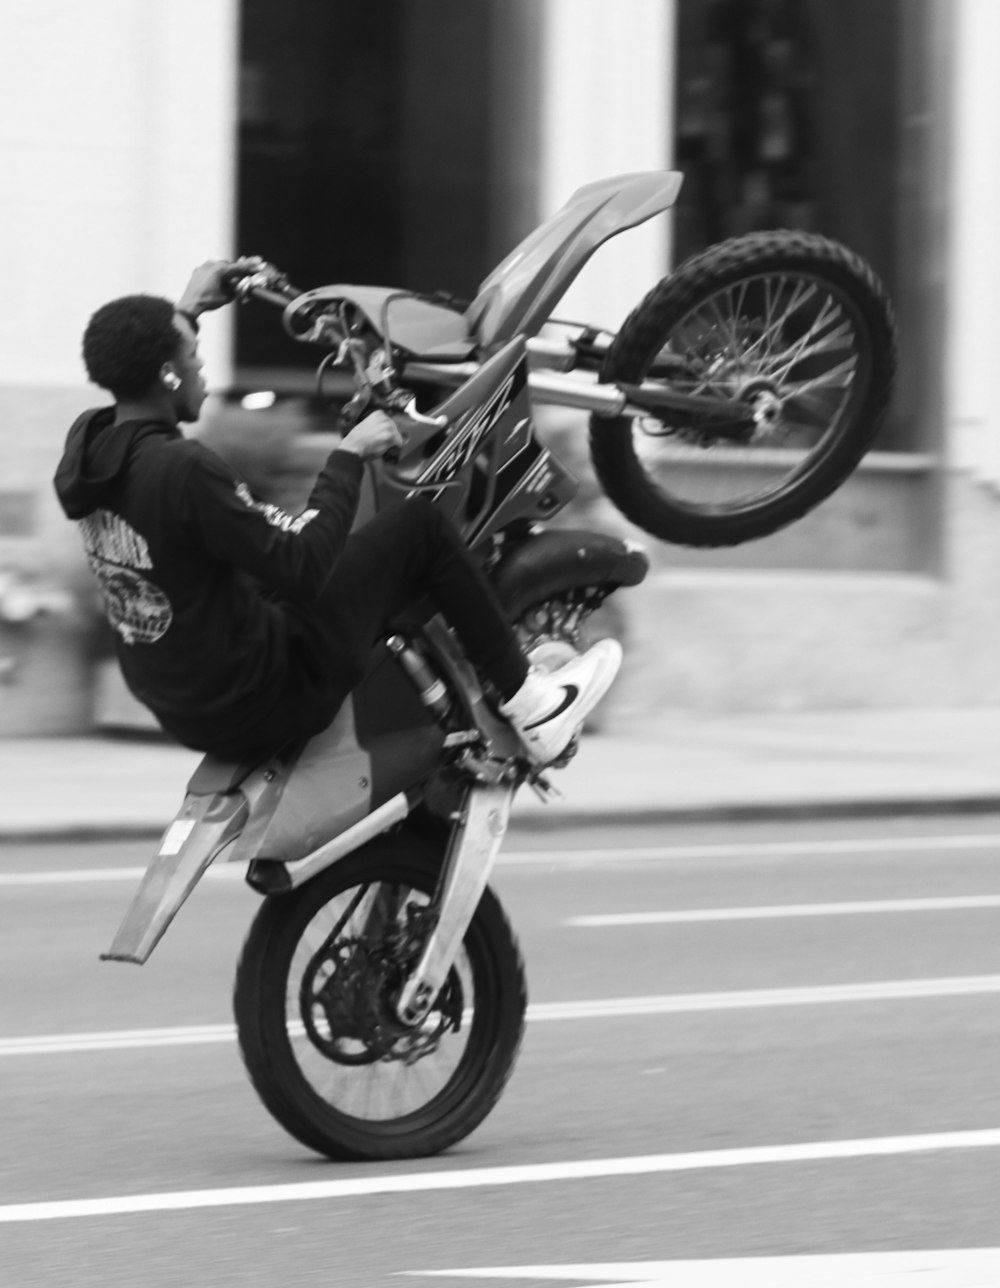 man in black jacket riding motorcycle in grayscale photography